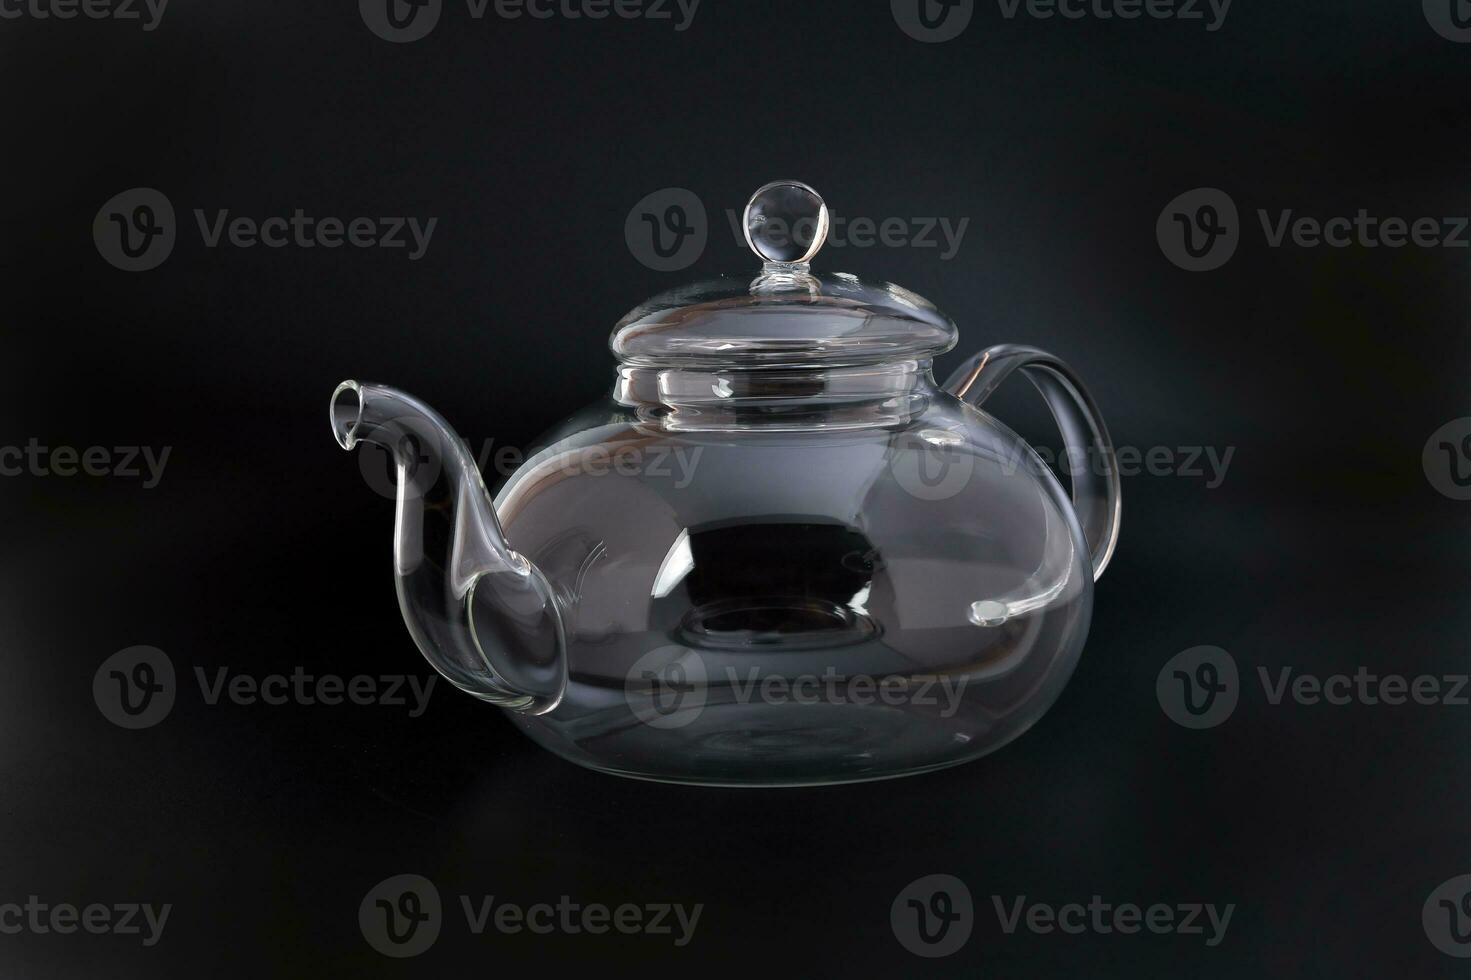 https://static.vecteezy.com/system/resources/previews/024/325/952/non_2x/empty-transparent-glass-see-through-teapot-kettle-on-black-background-photo.JPG